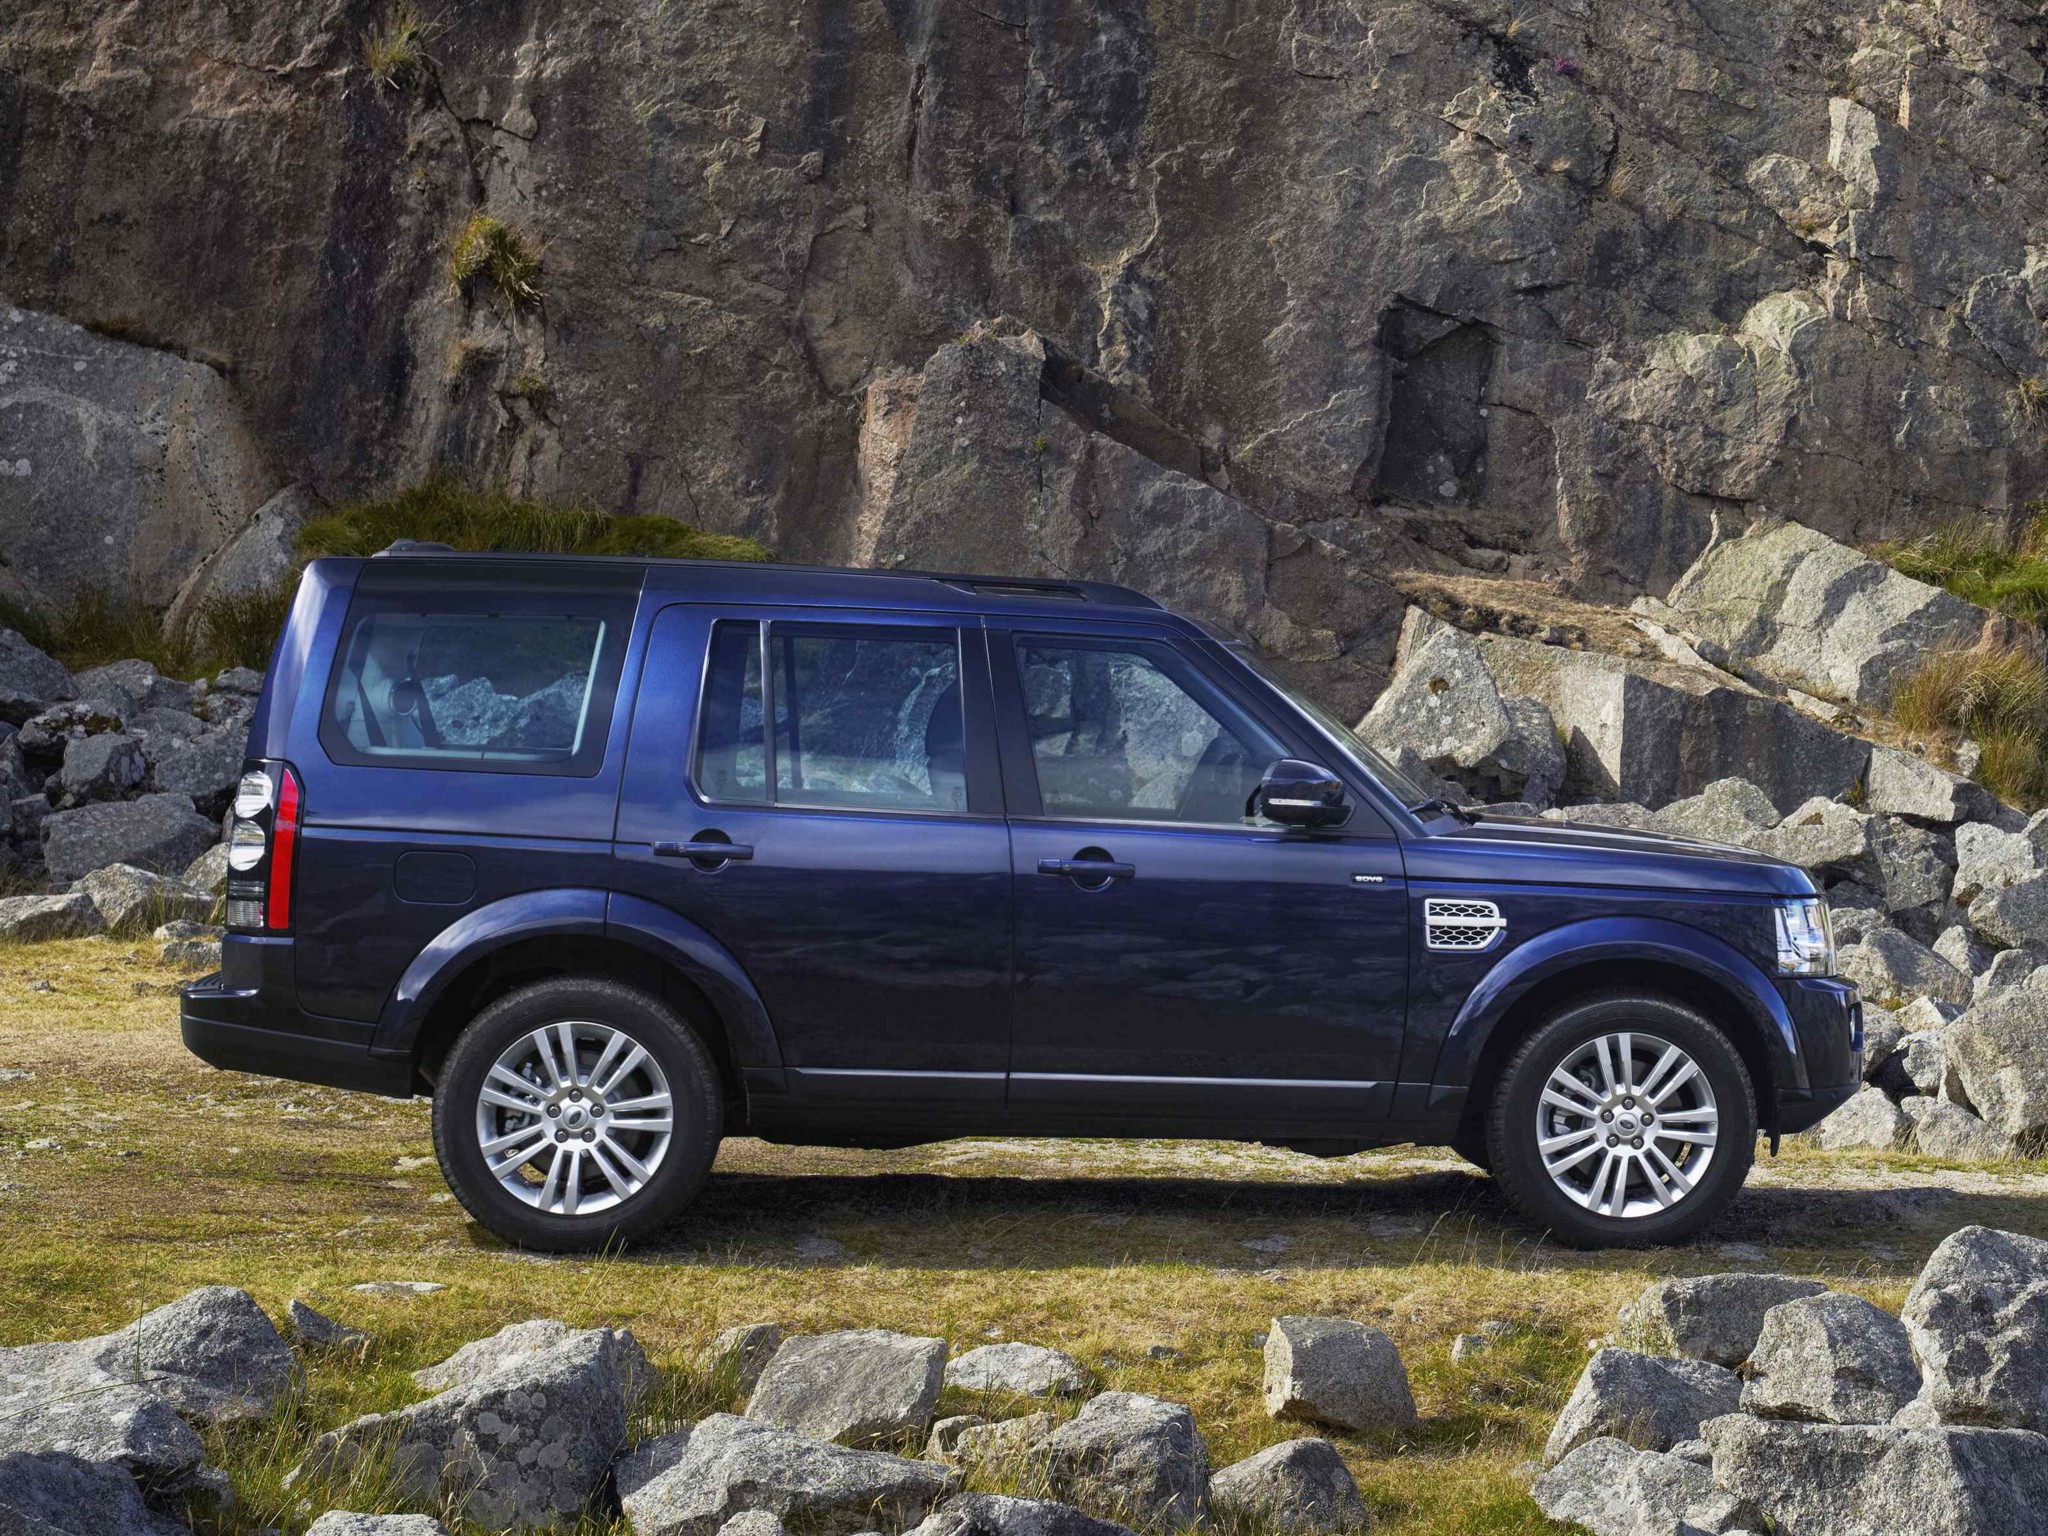 2021 Land Rover Discovery Facelift Gets New Engines And 